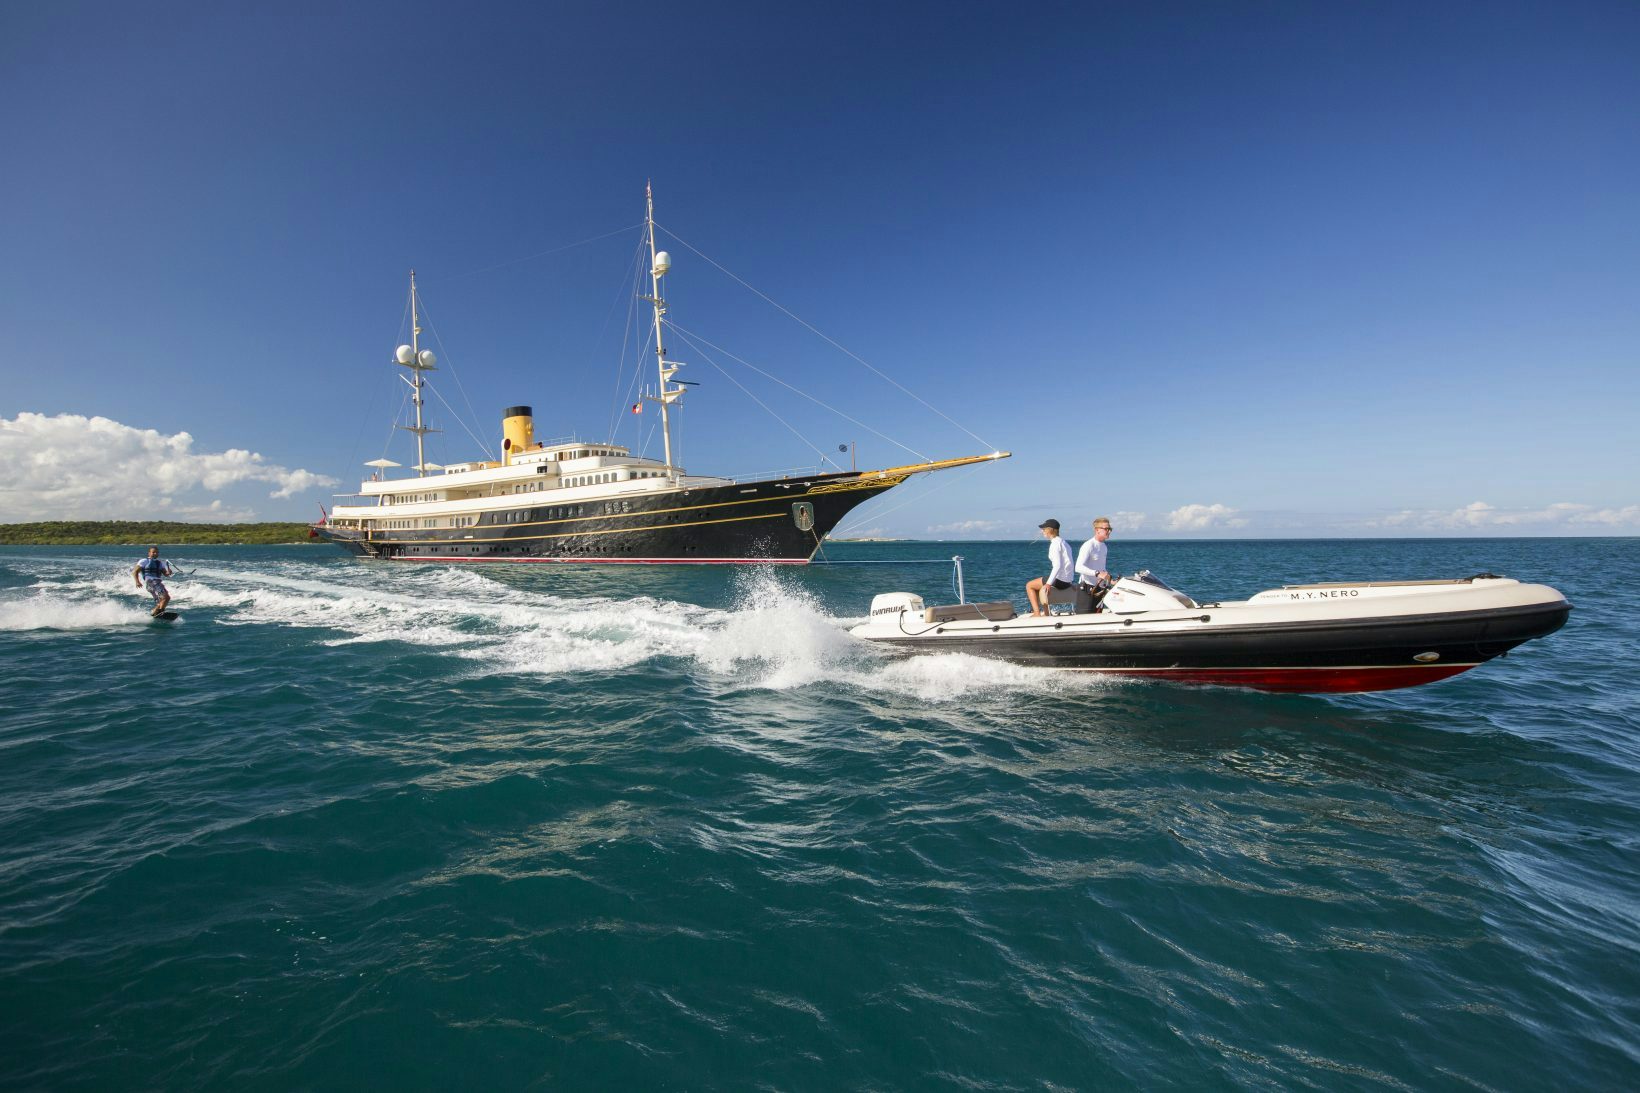 The rebound of the yachting industry